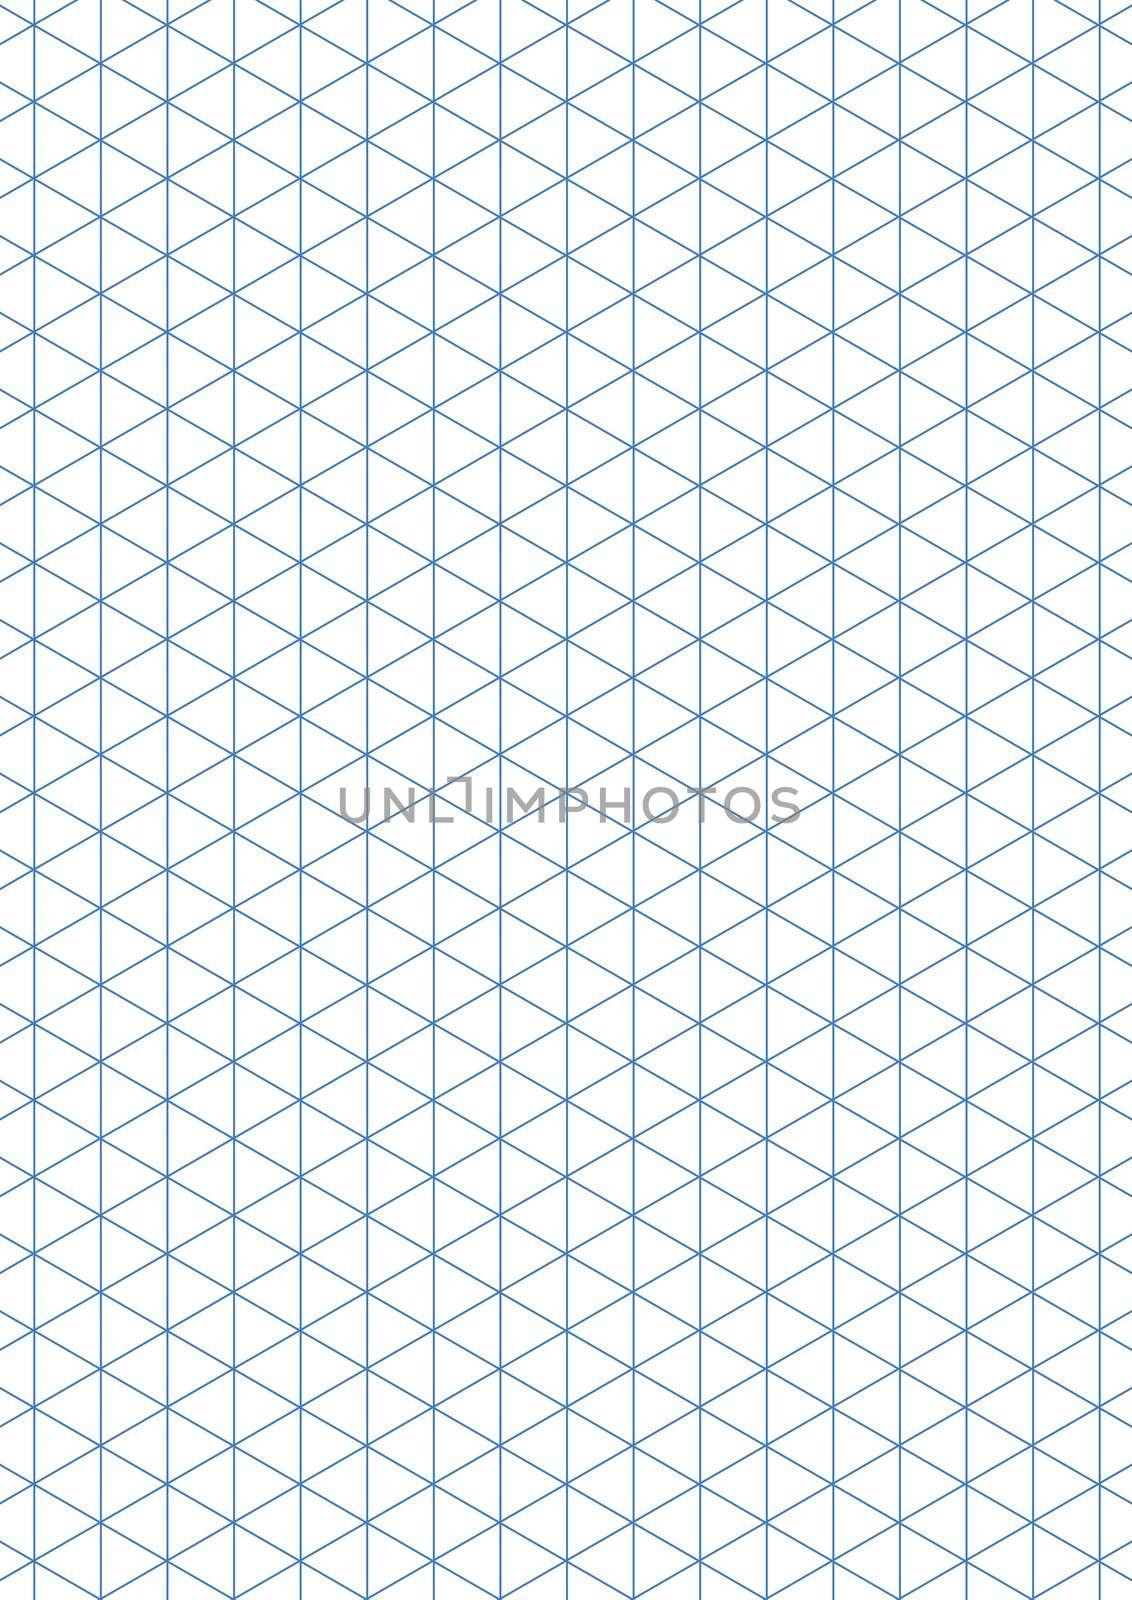 Graph paper. Printable isometric color grid paper with color lines. Geometric background for school, textures, notebook, diary, notes, print, books. Realistic lined paper blank size A4 by allaku